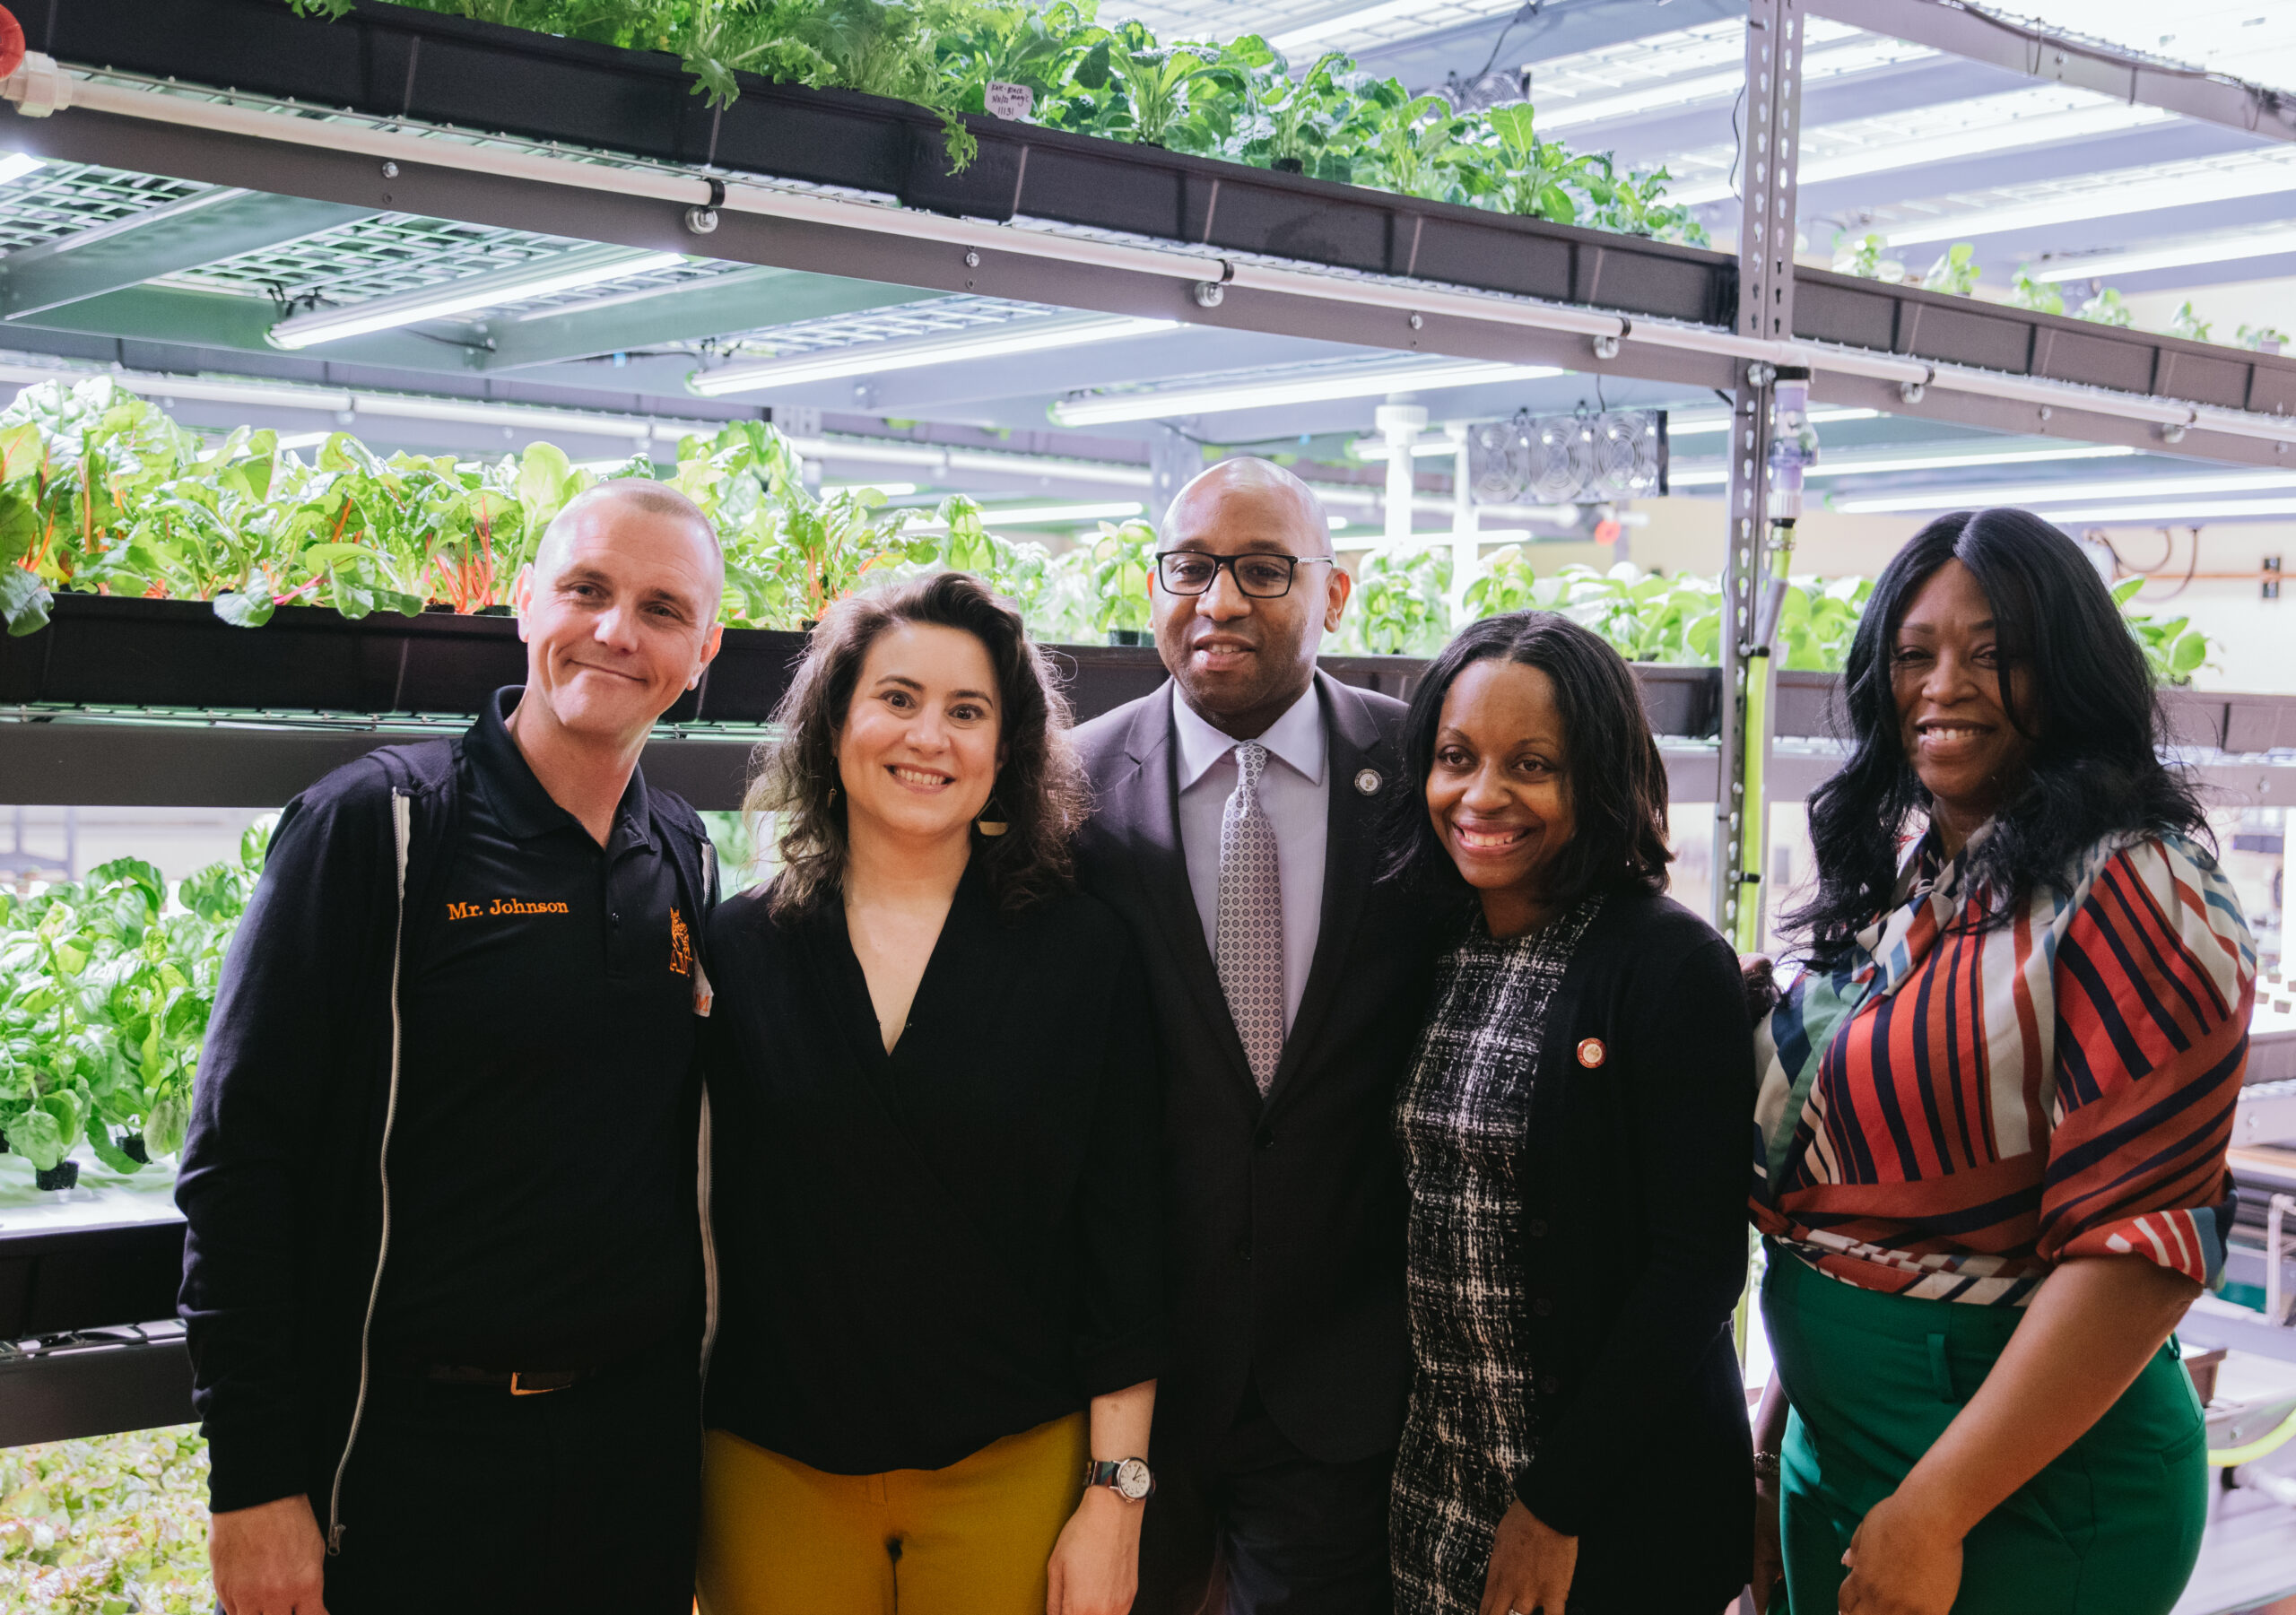 (From l. to r.) Academy of Medical Technology Principal (AMT) William Johnson, Teens for Justice Deputy Director Gabrielle Mosquera, Queens Borough President Donovan Richards, Council member Selvena Brooks-Powers and Principal Frederick Douglas VI Tenesha Worley (Photo by Jessica DiMento)